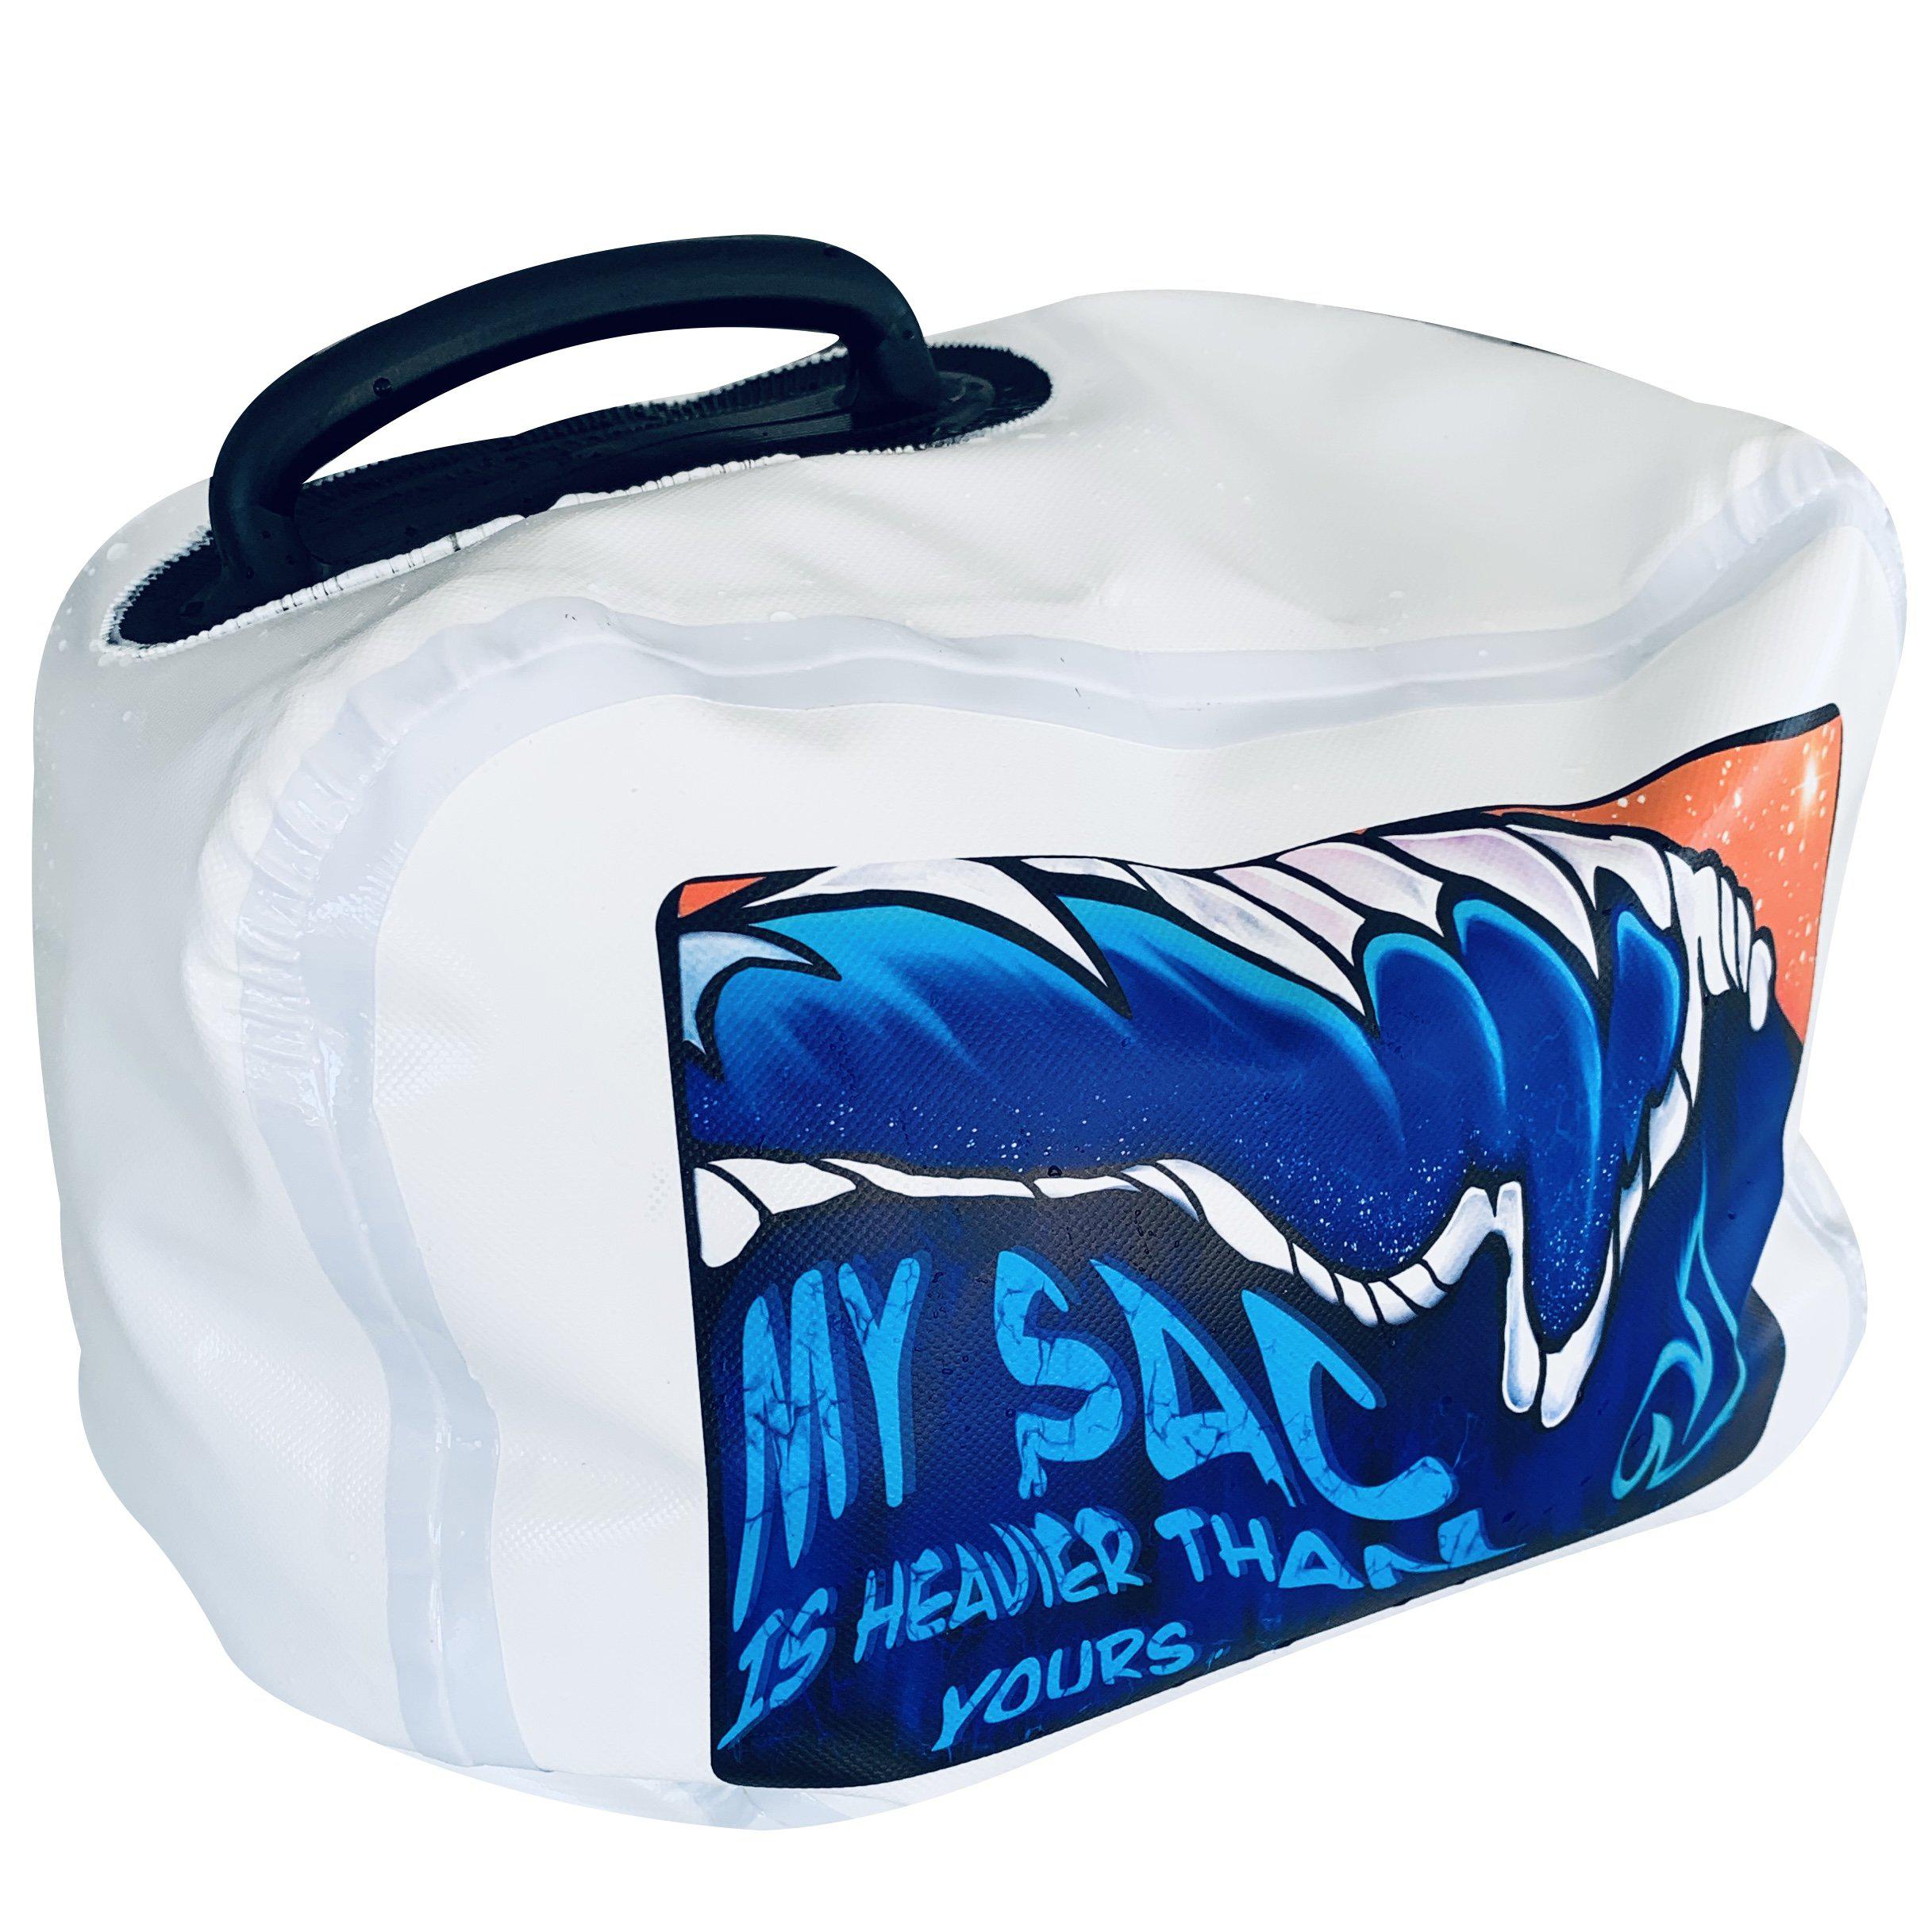 FatSac Fillable Weight Bag Ballast. NautiCurl My Sac is Heavier Than Yours Wakesurfing wakeboarding lead weight bag. Fills with sand or water. 